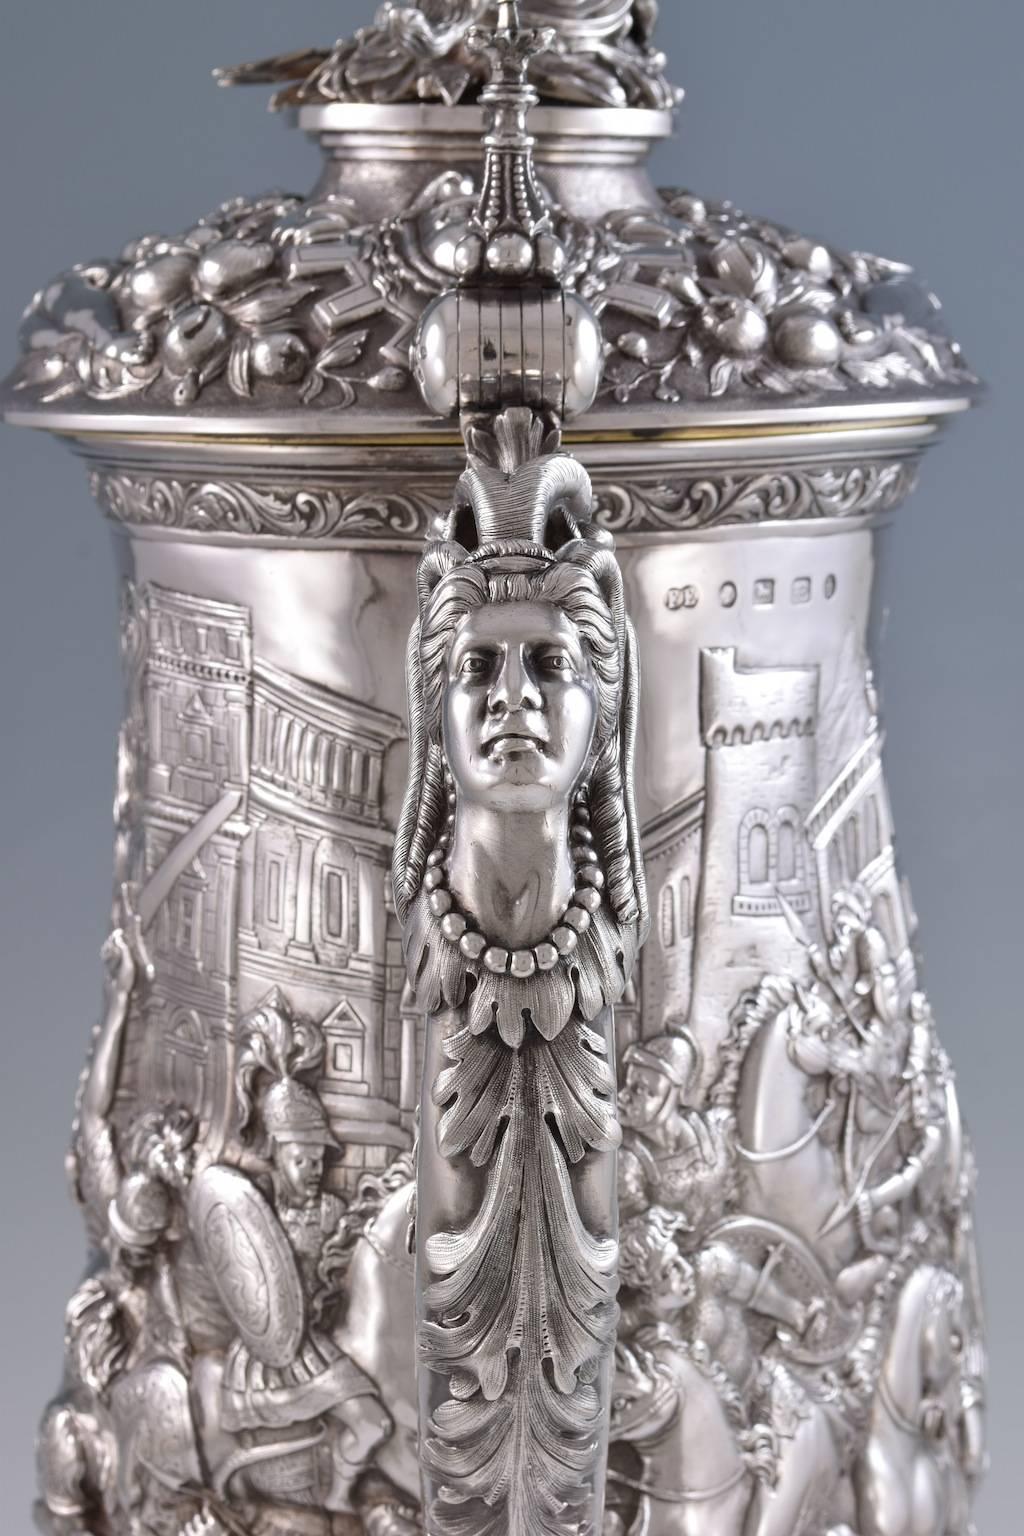 Hallmarked Elkington & Co. Birmingham, 1861.
 
Measures: 25 1/2 inches (65cm) high.
235oz (7.3kg)
 
Profusely decorated in high relief with scenes depicting a great Greek battle. Most likely Alexander's victory at Thebes (335 B.C.) The hinged